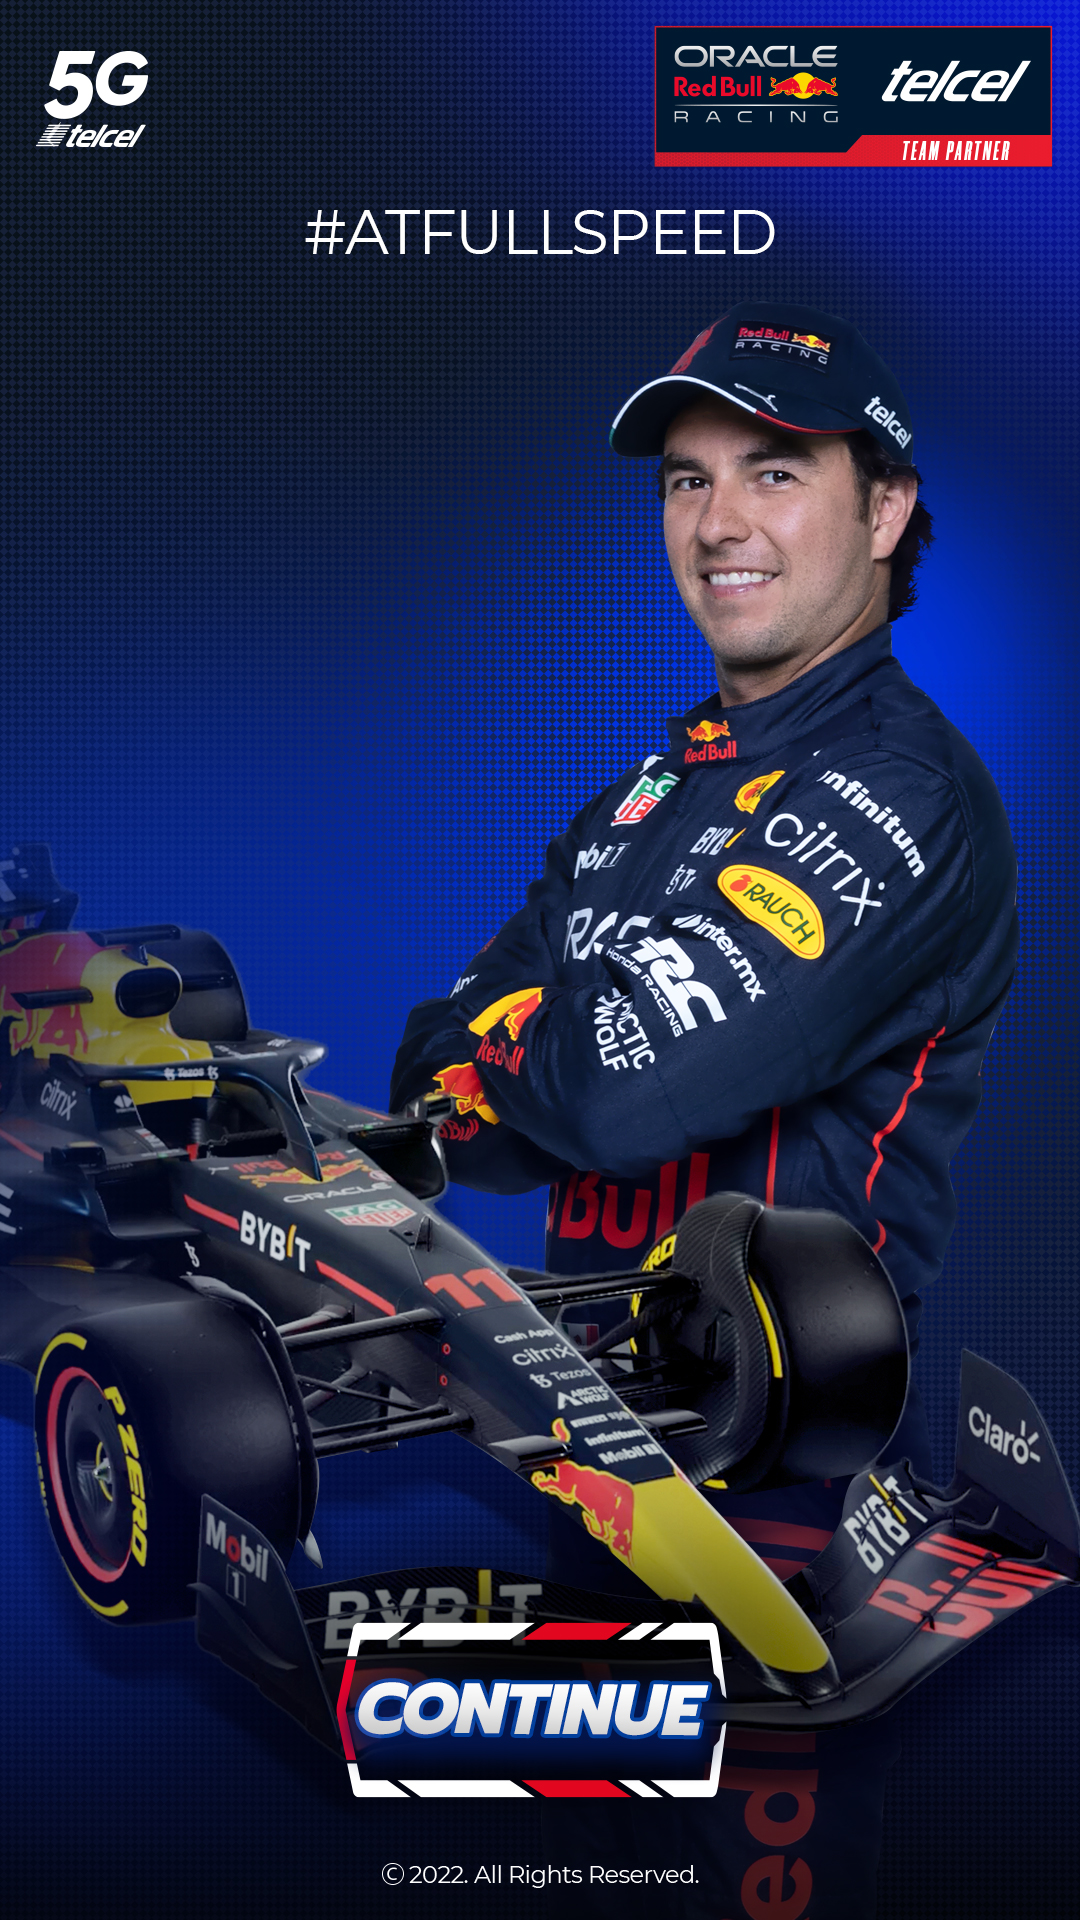 AR for RedBull with Checo Perez